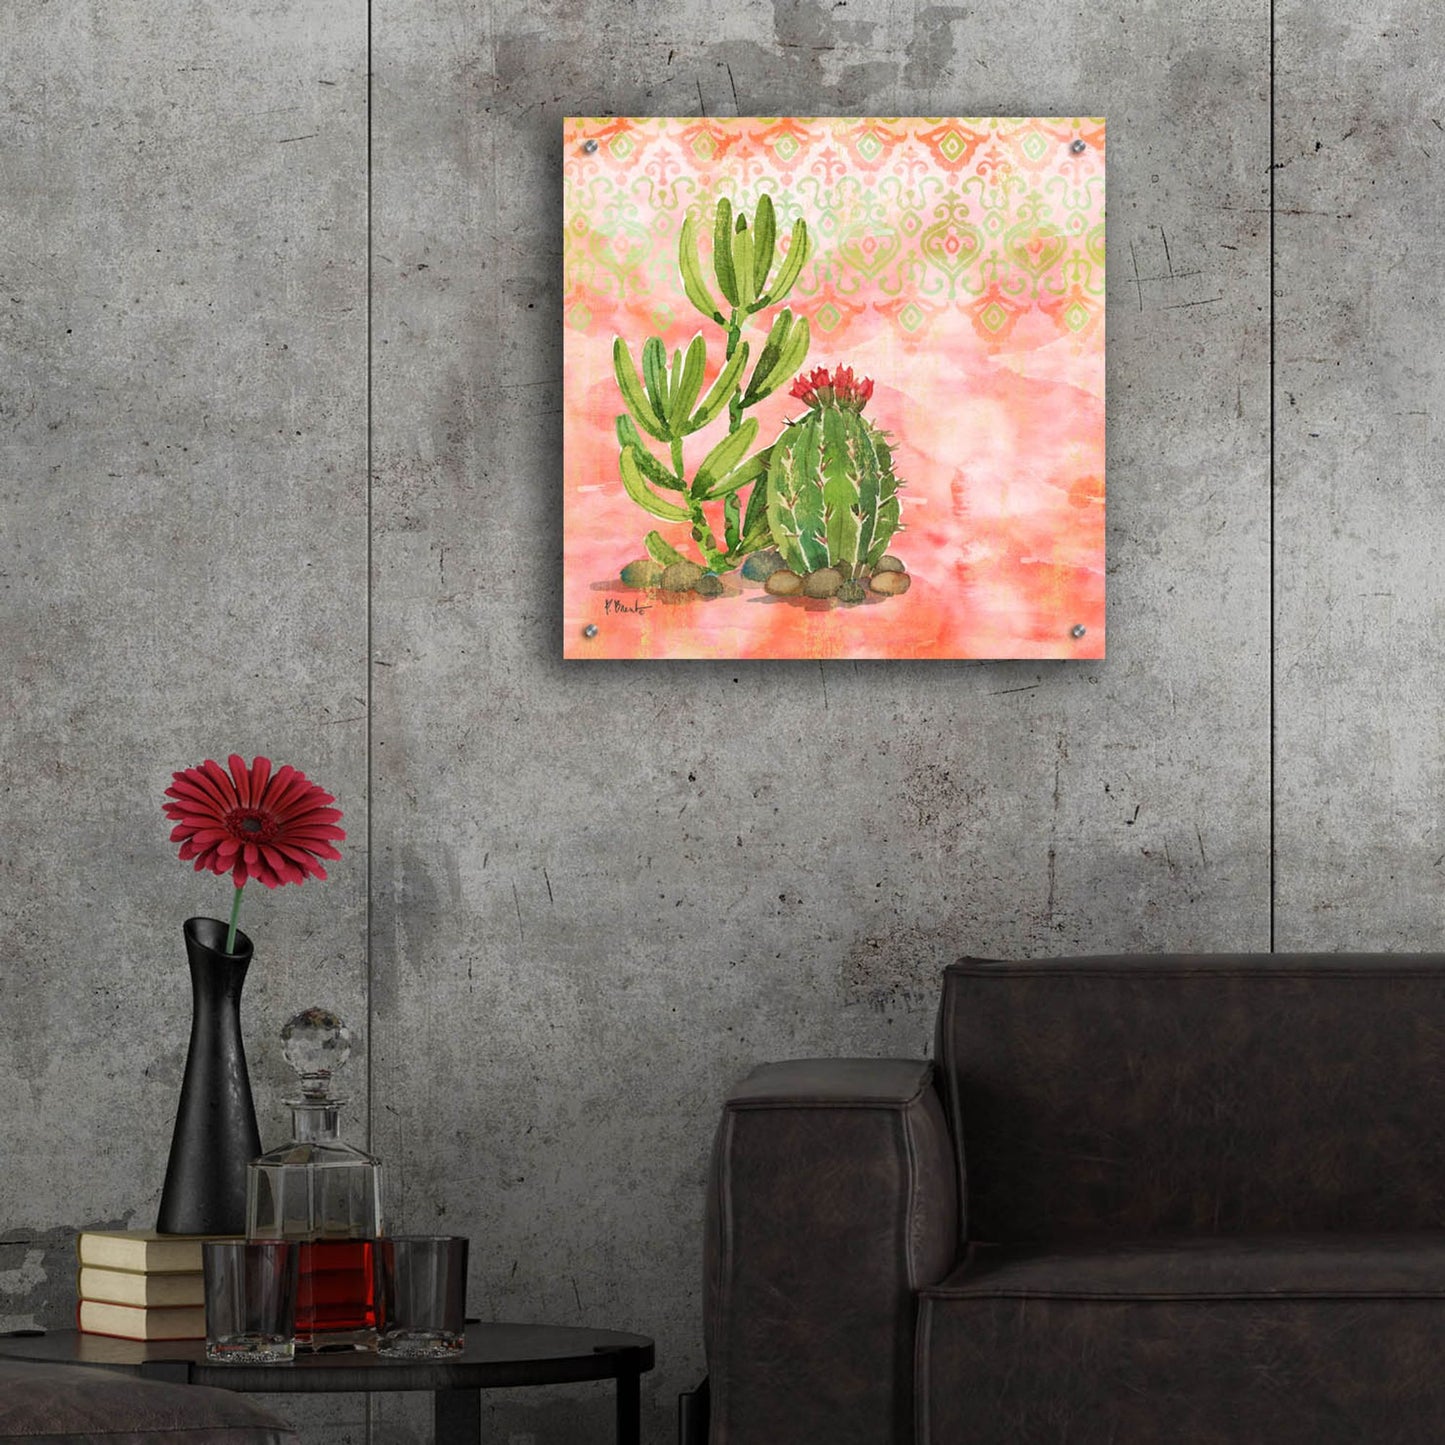 Epic Art 'Cactus III - Coral' by Paul Brent, Acrylic Glass Wall Art,24x24